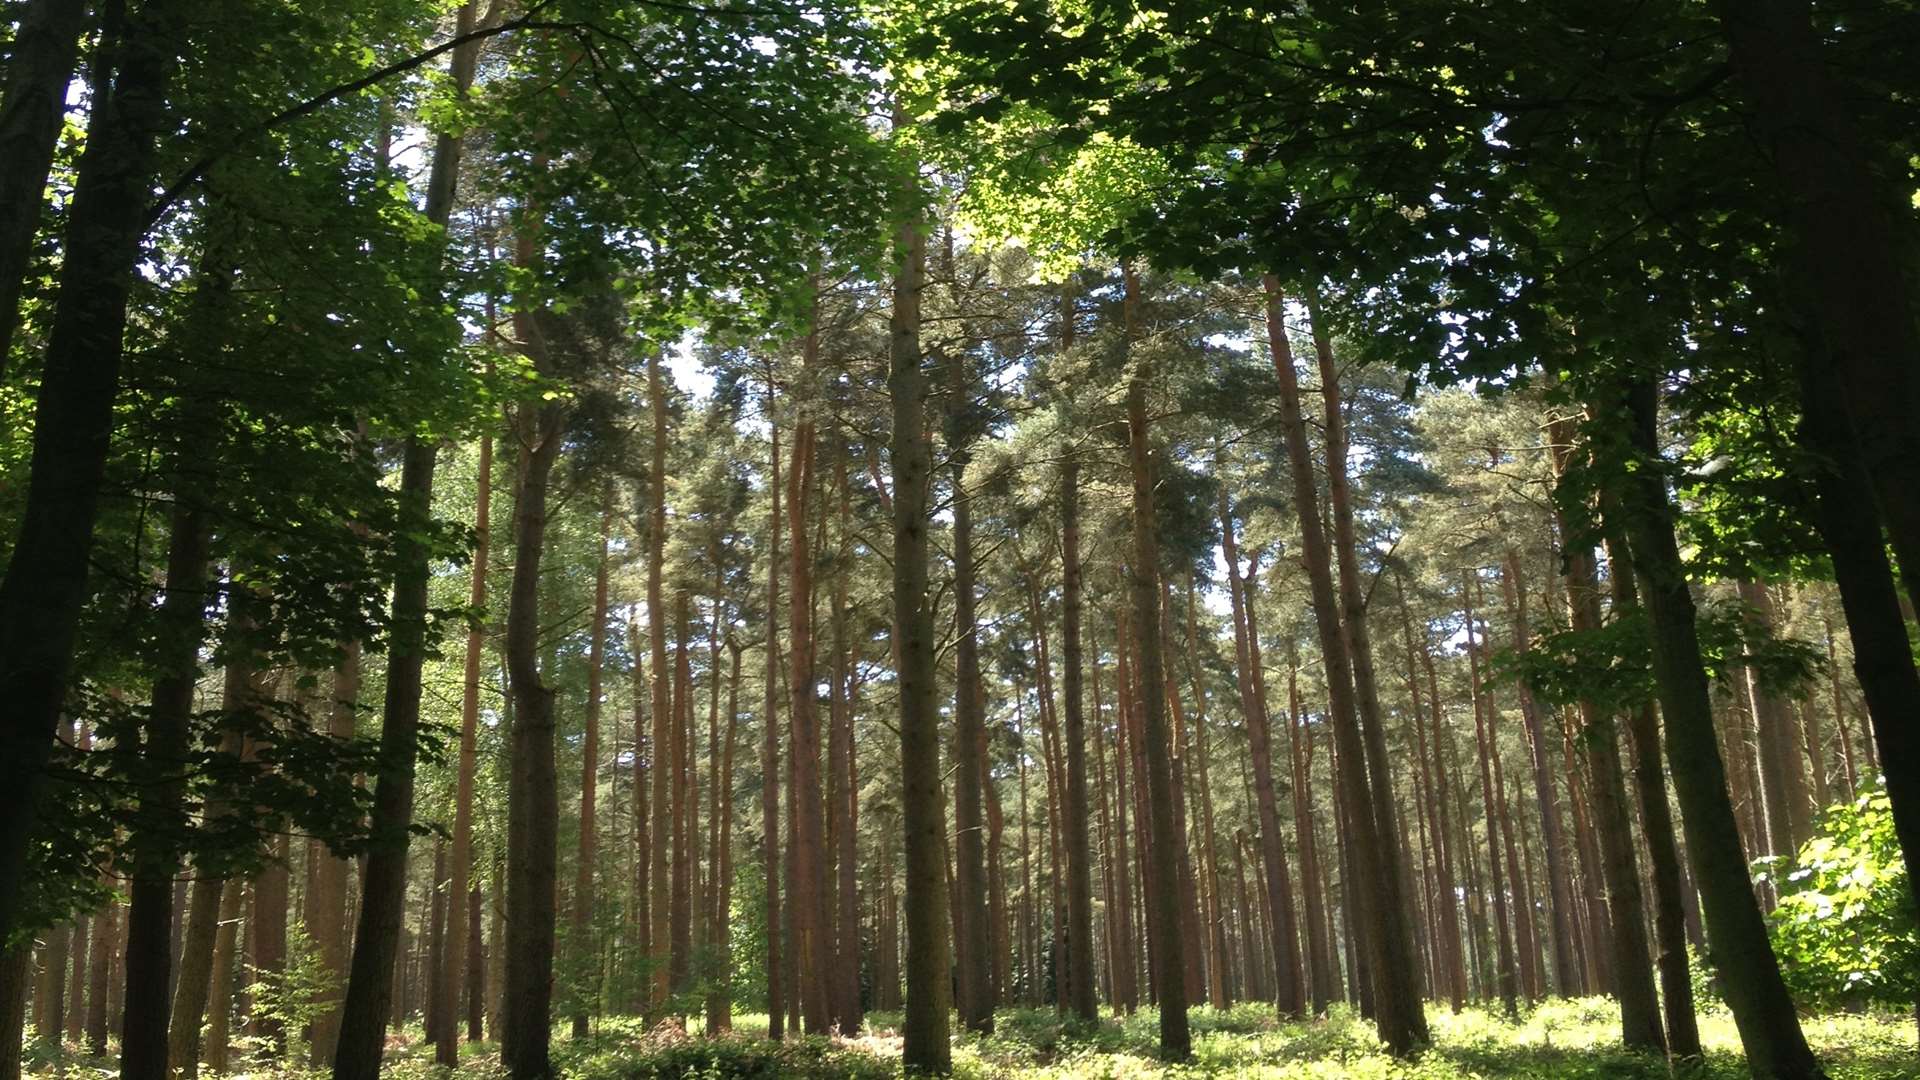 Bedgebury National Pinetum and Forest is gearing up for Living Symphonies soon where visitors will be able to hear the sounds of the forest in musical form